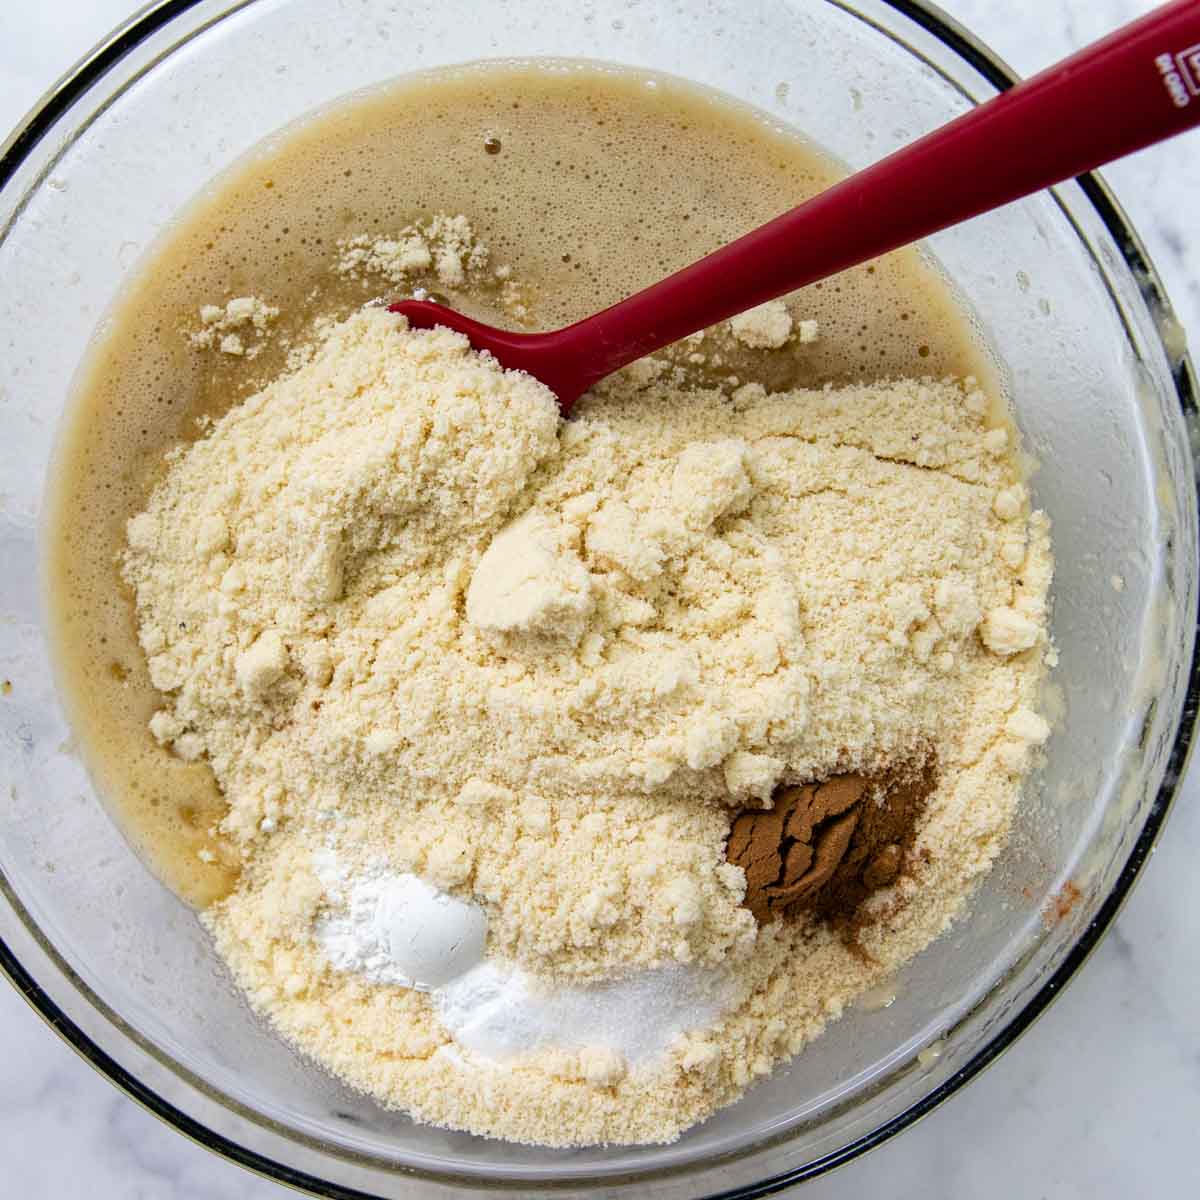 dry ingredients mixed in the bowl with the mashed bananas.